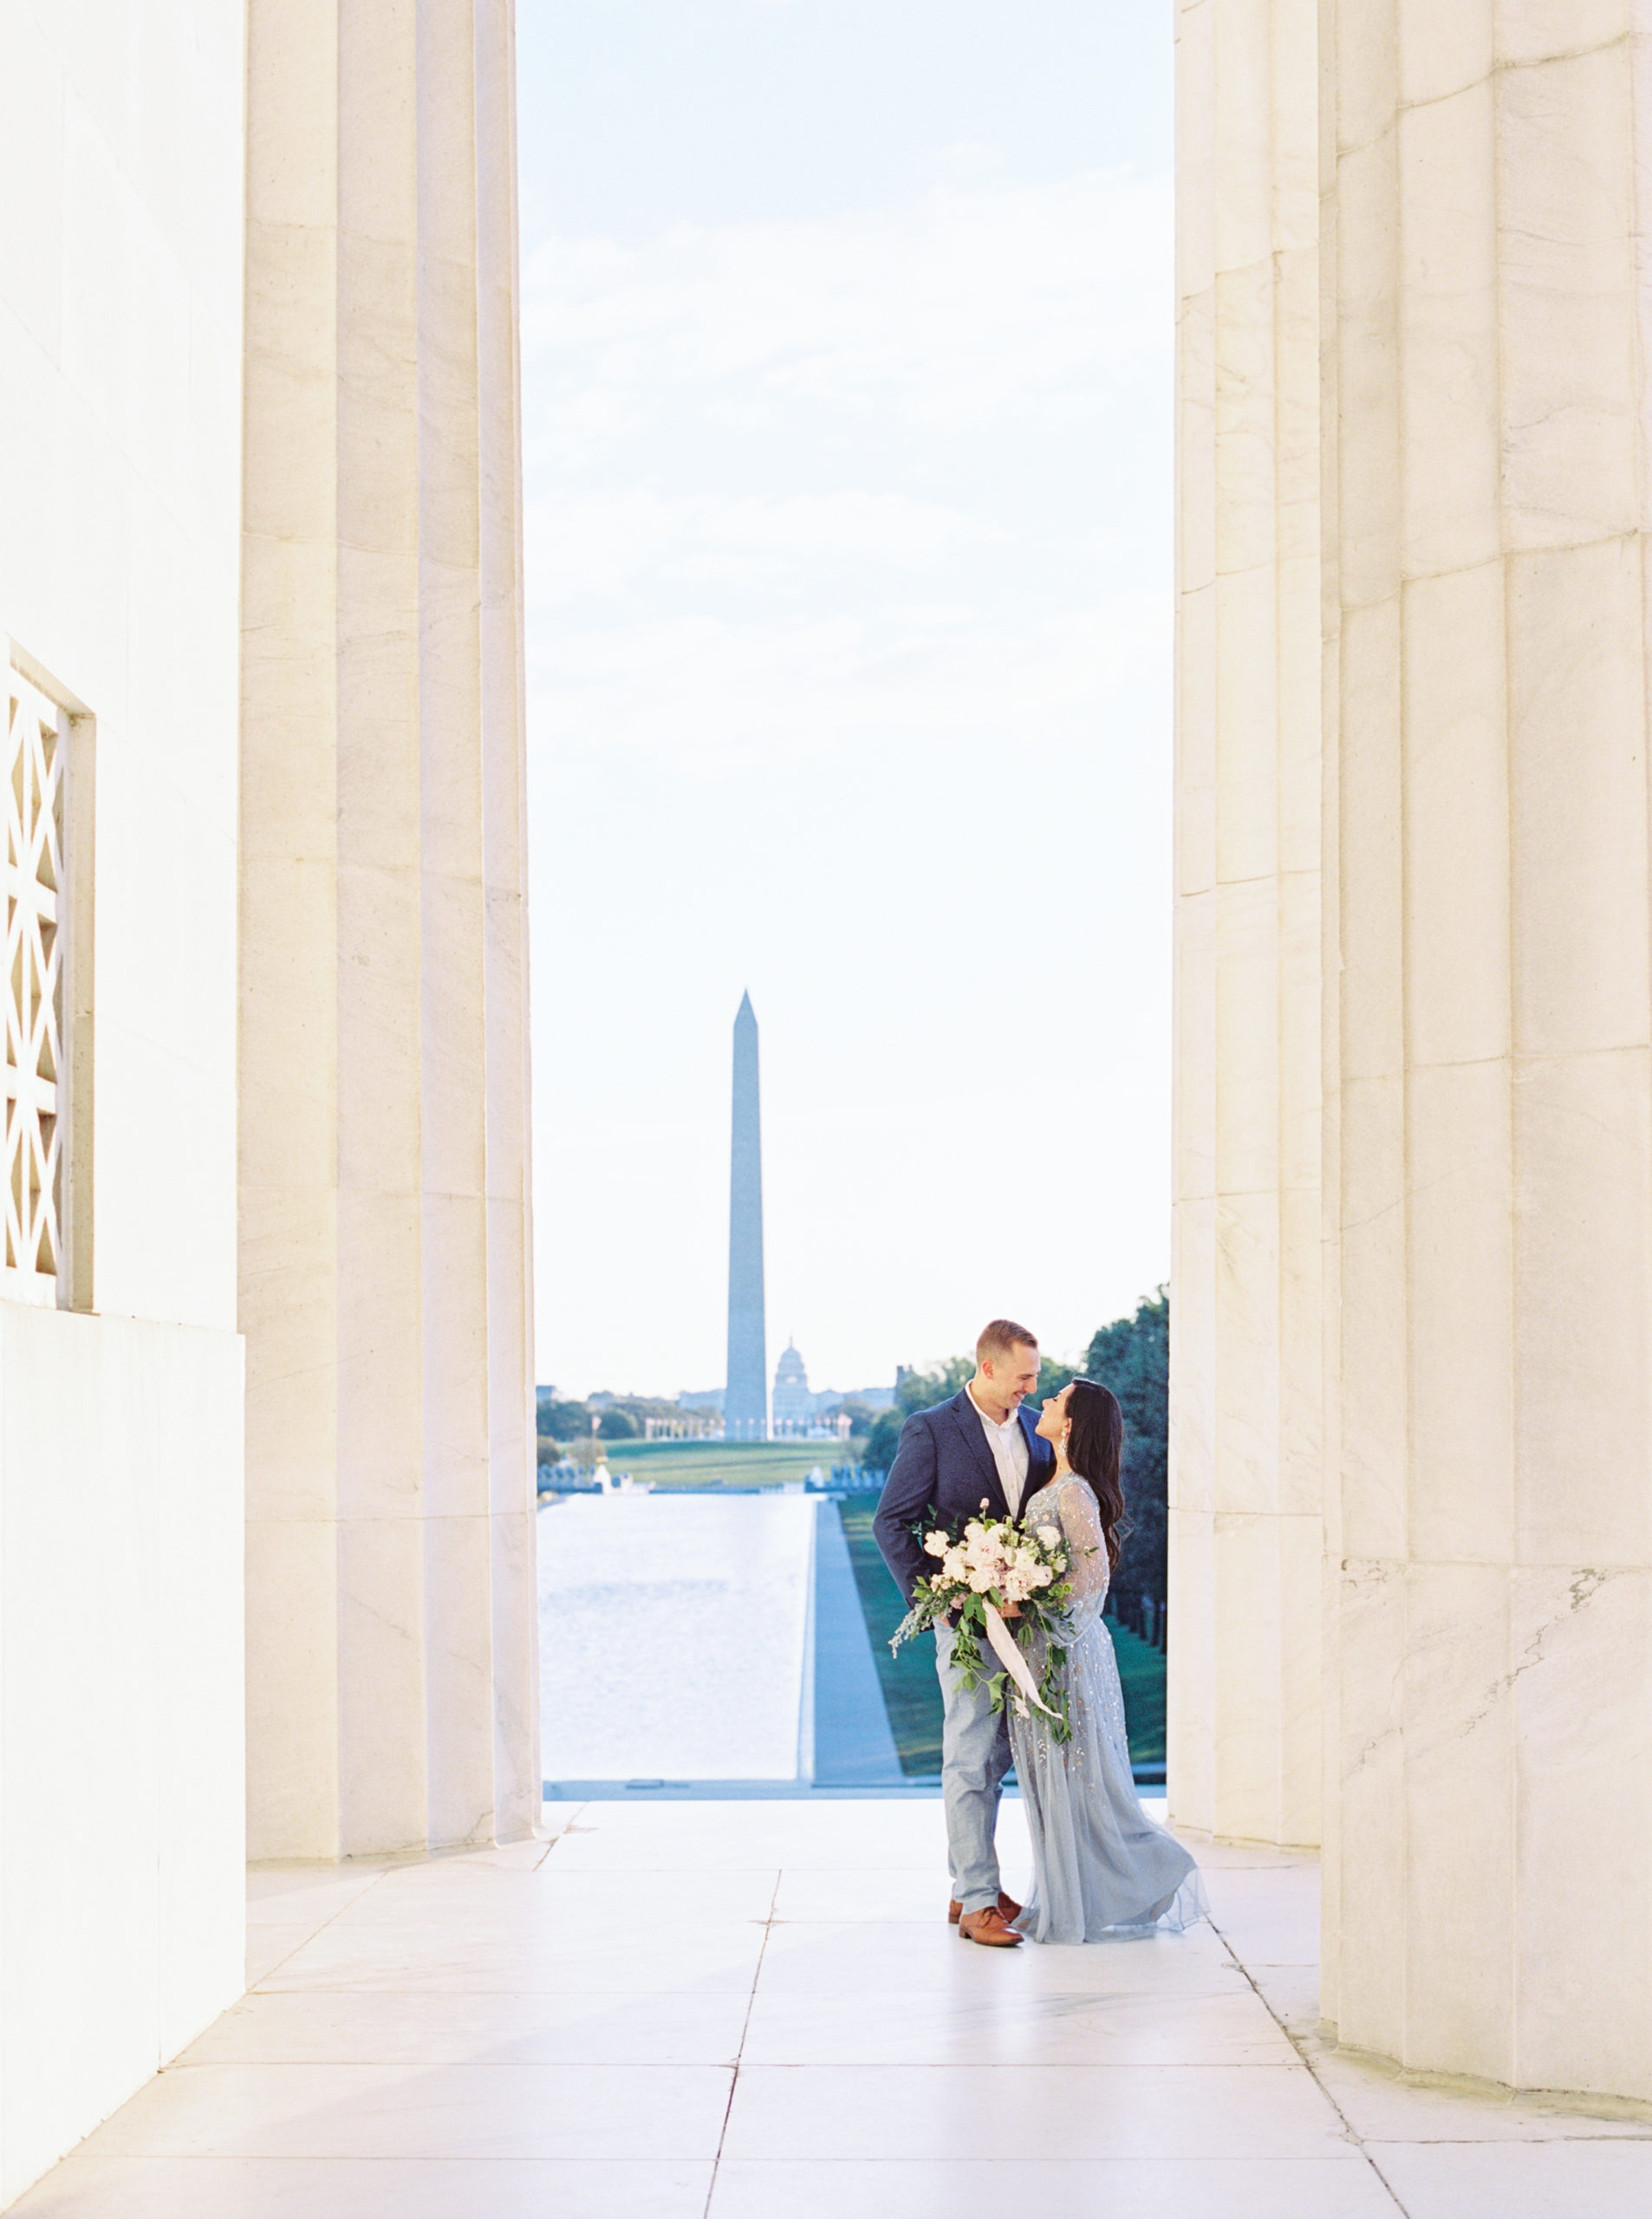 Classic Lincoln Memorial engagement session inside the iconic white pillars